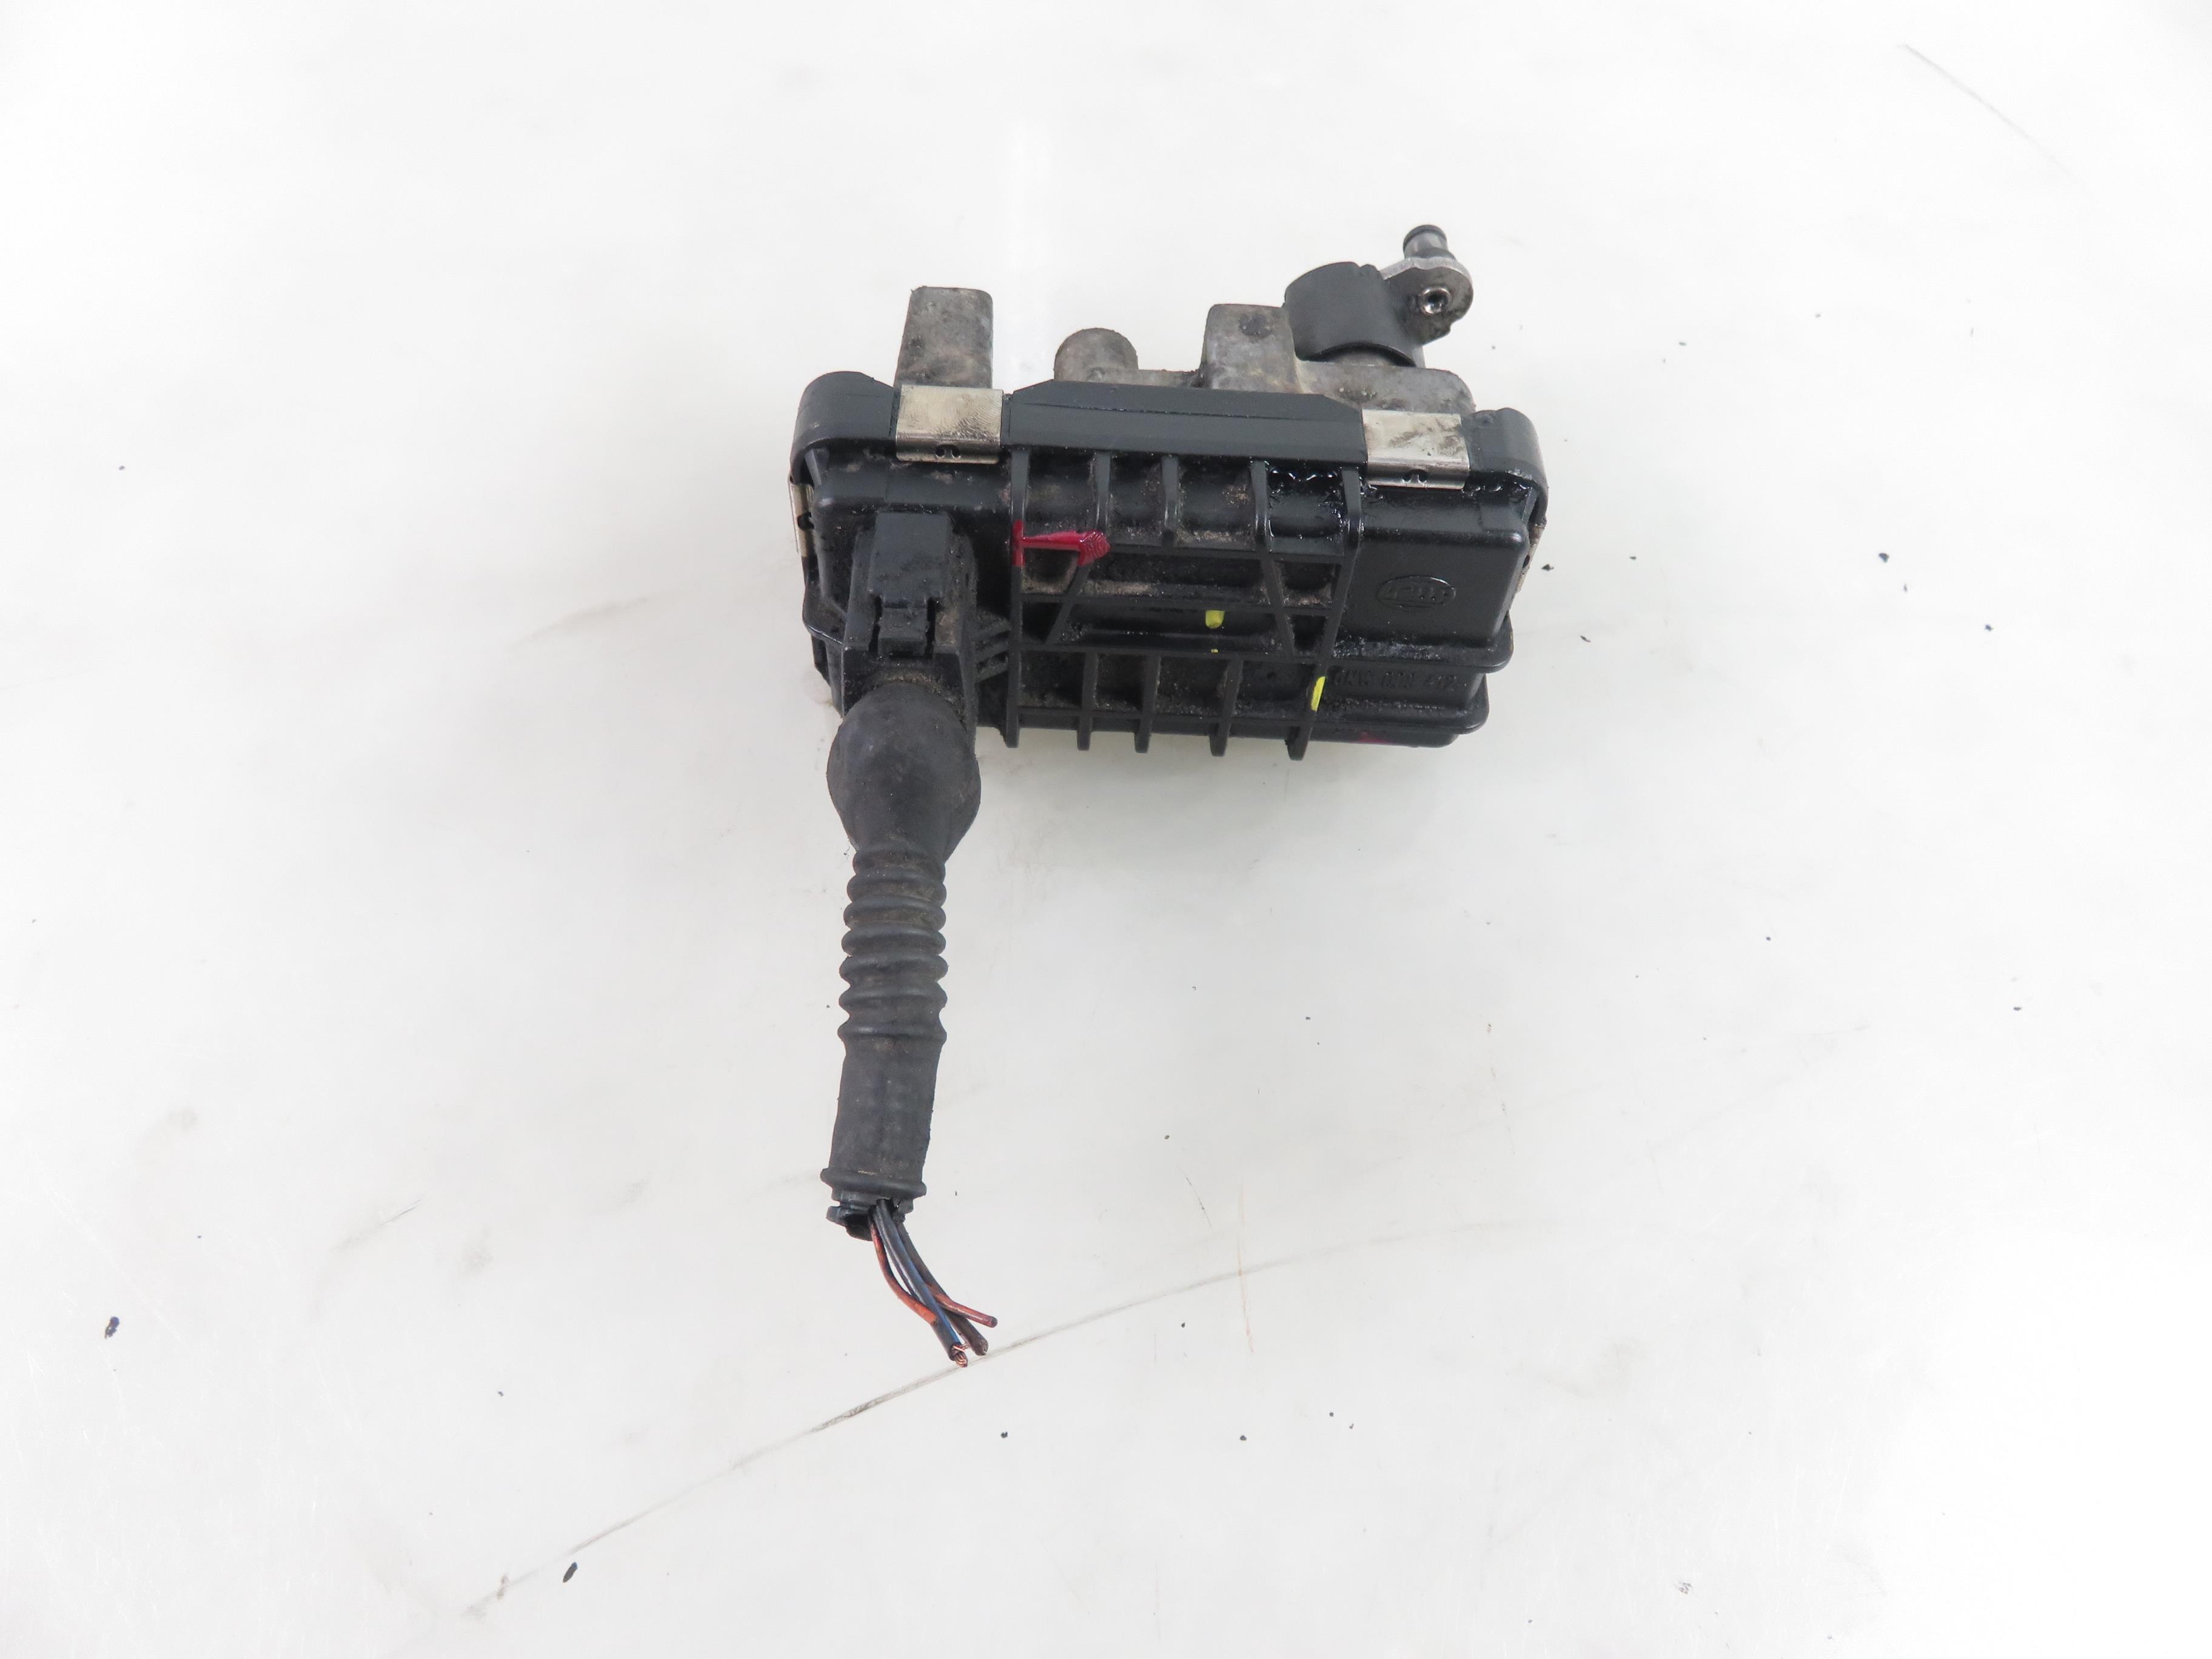 VOLKSWAGEN Touareg 1 generation (2002-2010) Electrical Turbocharger Control 6NW008412712120 24840368